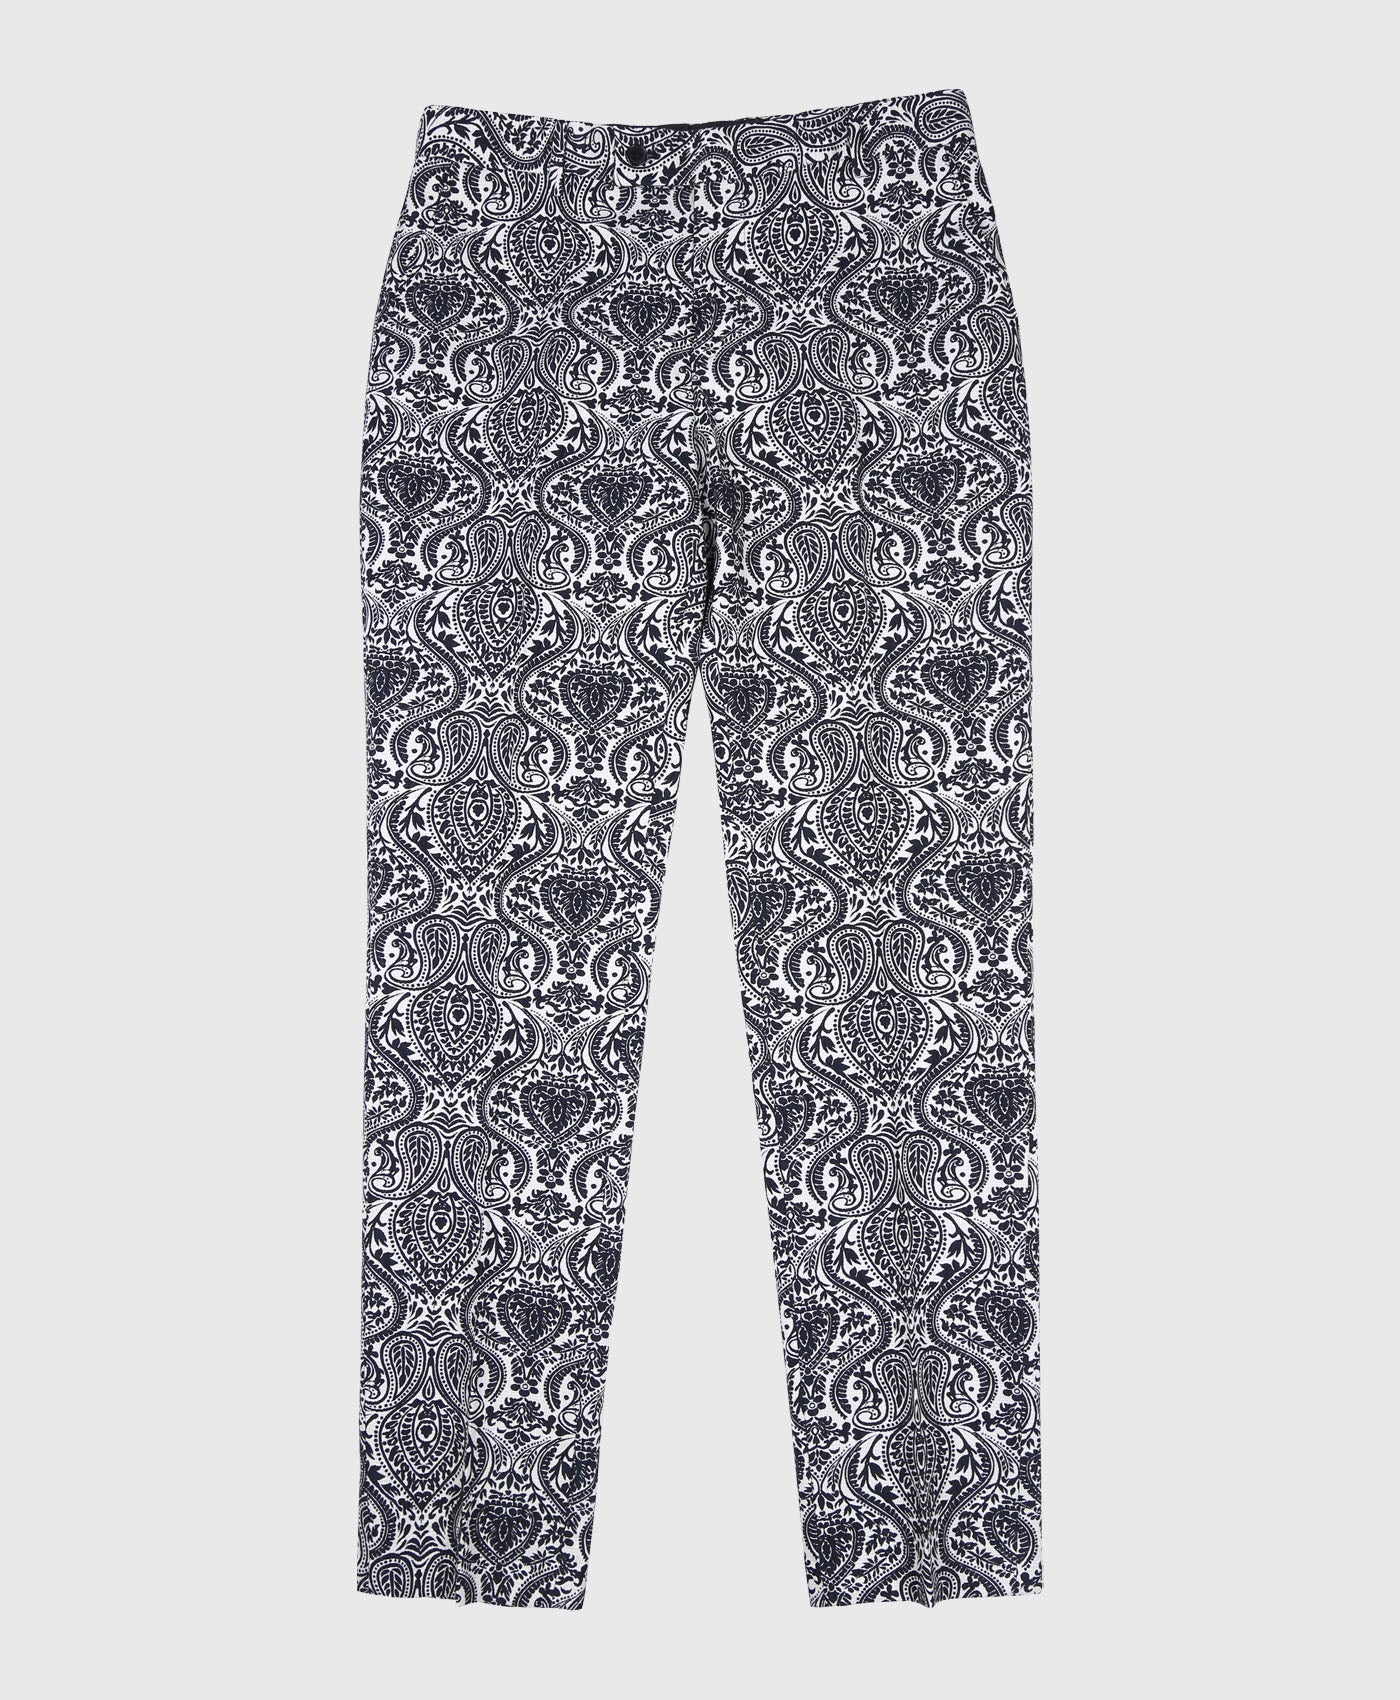 Paisley Print Suit Trouser In Navy And Cream